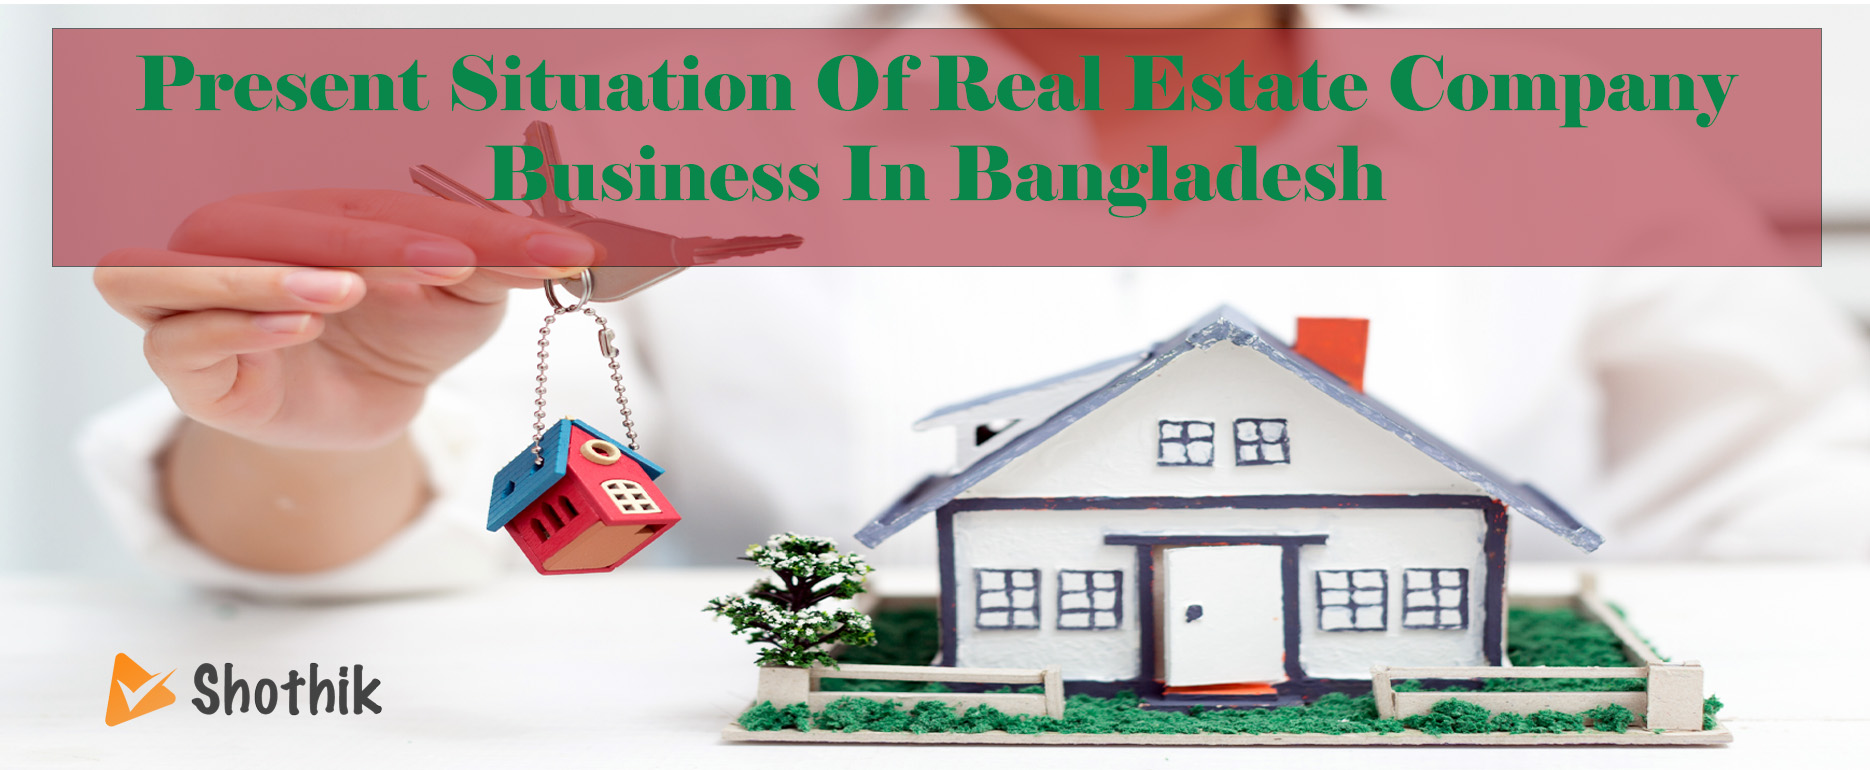 Present Situation Of Real Estate Company Business In Bangladesh